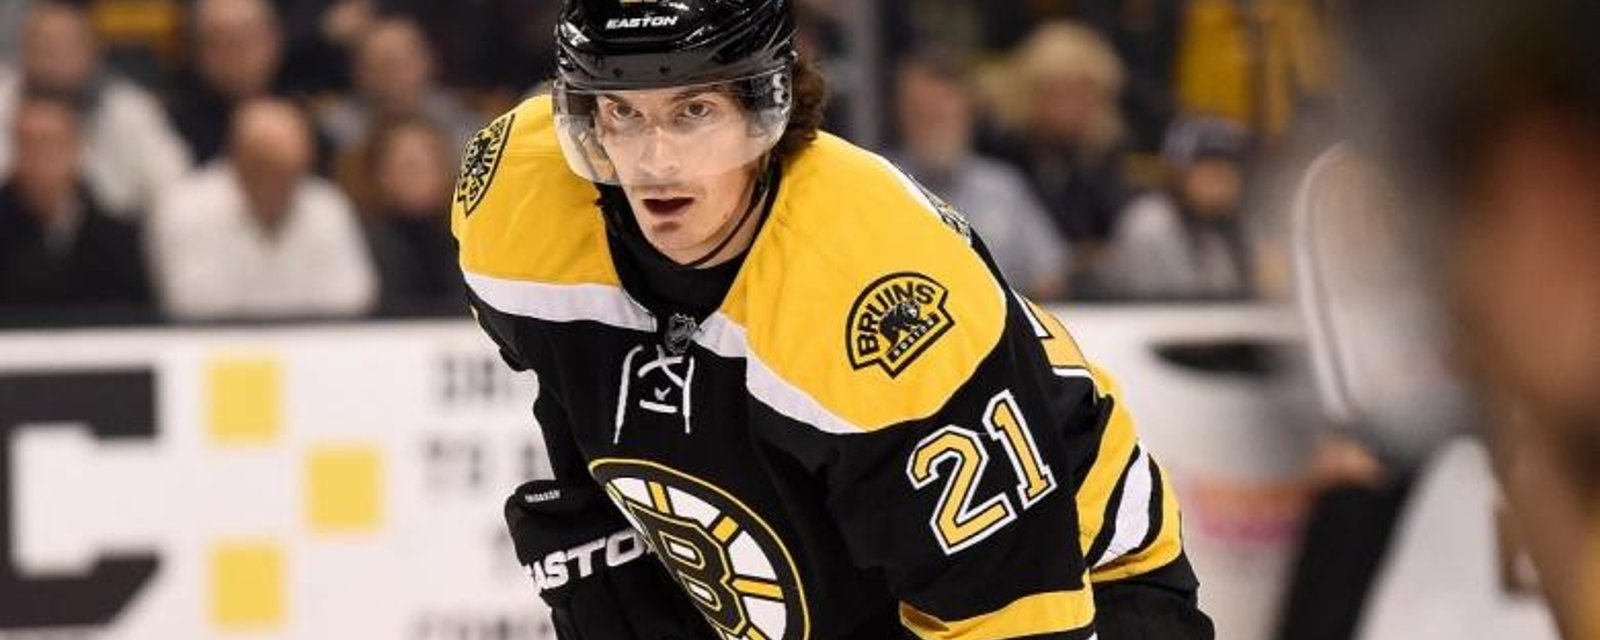 Is starting to sound like the Bruins may trade their star forward.